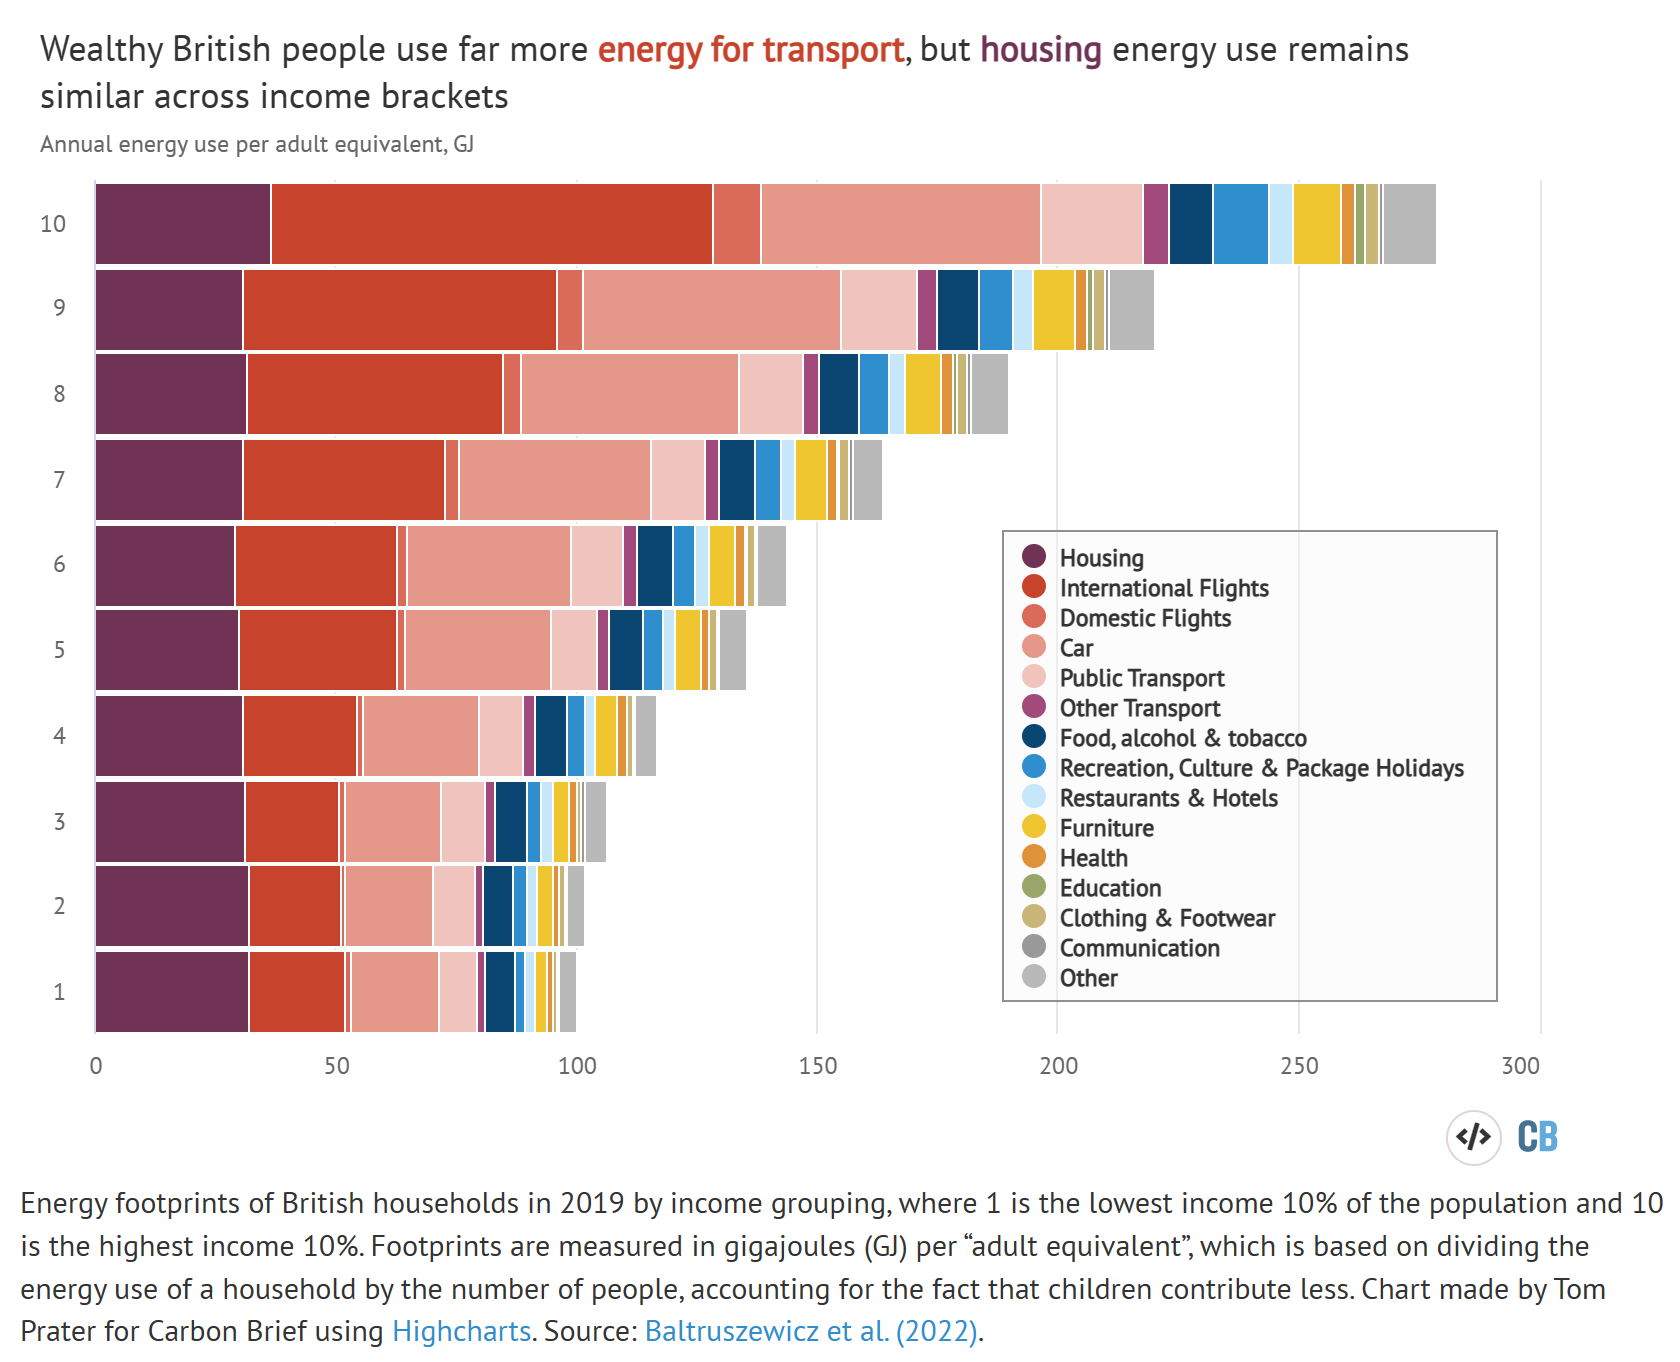 Energy footprints of British households in 2019 by income grouping, where 1 is the lowest income 10 percent of the population and 10 is the highest income 10 percent. Footprints are measured in gigajoules (GJ) per “adult equivalent”, which is based on dividing the energy use of a household by the number of people, accounting for the fact that children contribute less. Data: Baltruszewicz, et al., 2022 / Ecological Economics. Graphic: Tom Prater / Carbon Brief